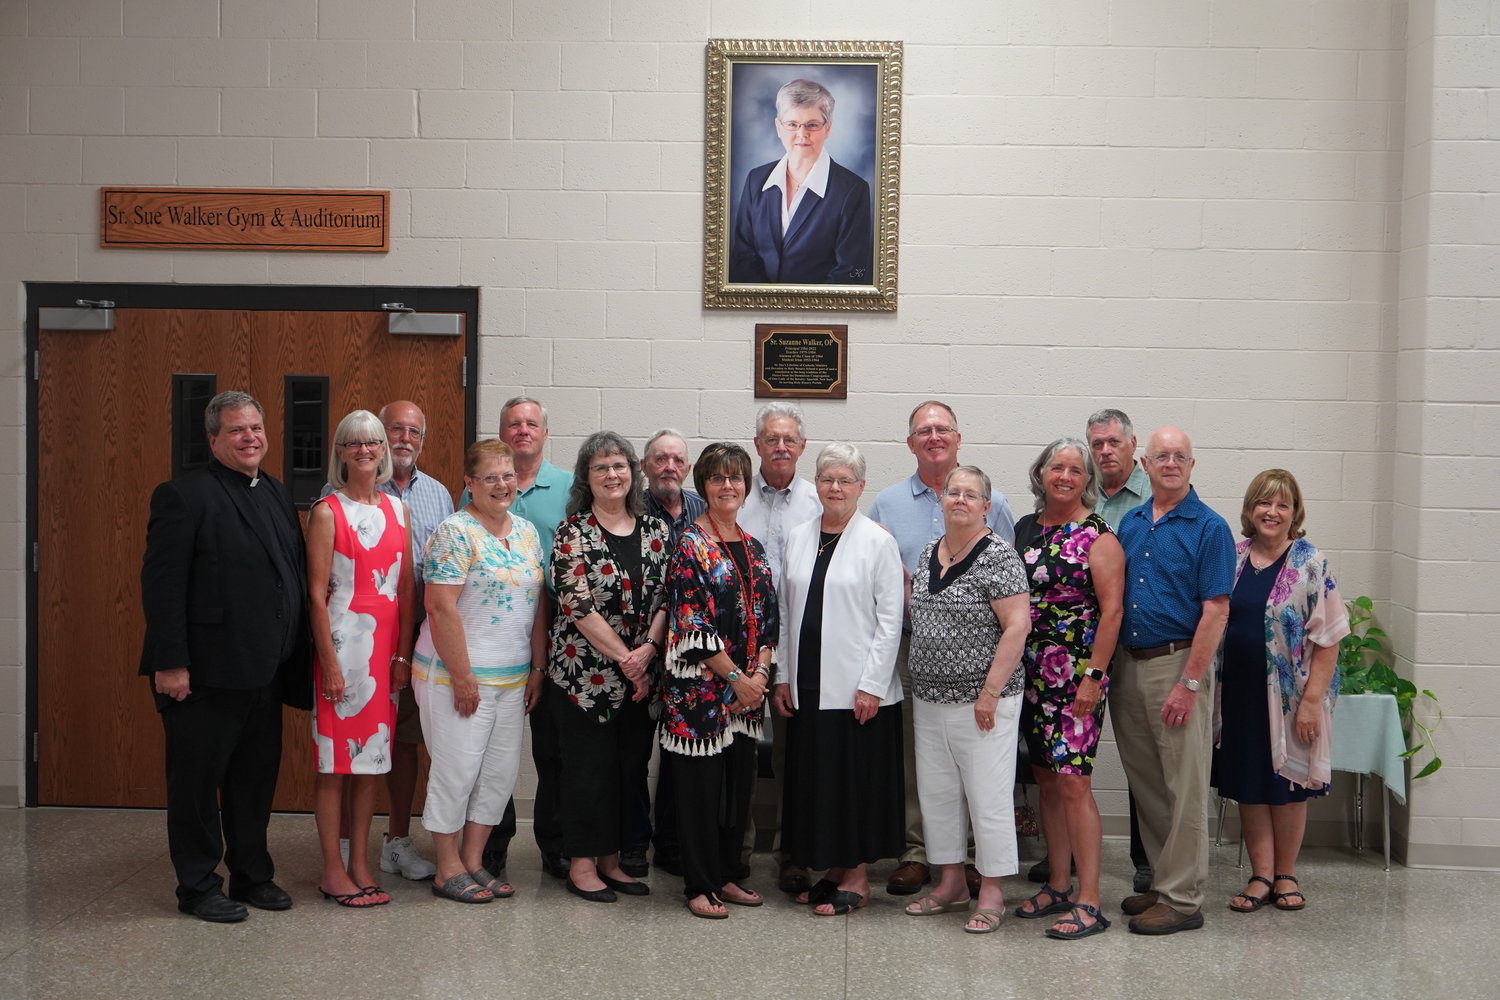 Dominican Sister Suzanne Walker, members of her family and Father Gregory Oligschlaeger gather for a photo outside the newly-named Sister Sue Walker Gym and Auditorium in Holy Rosary School in Monroe City.